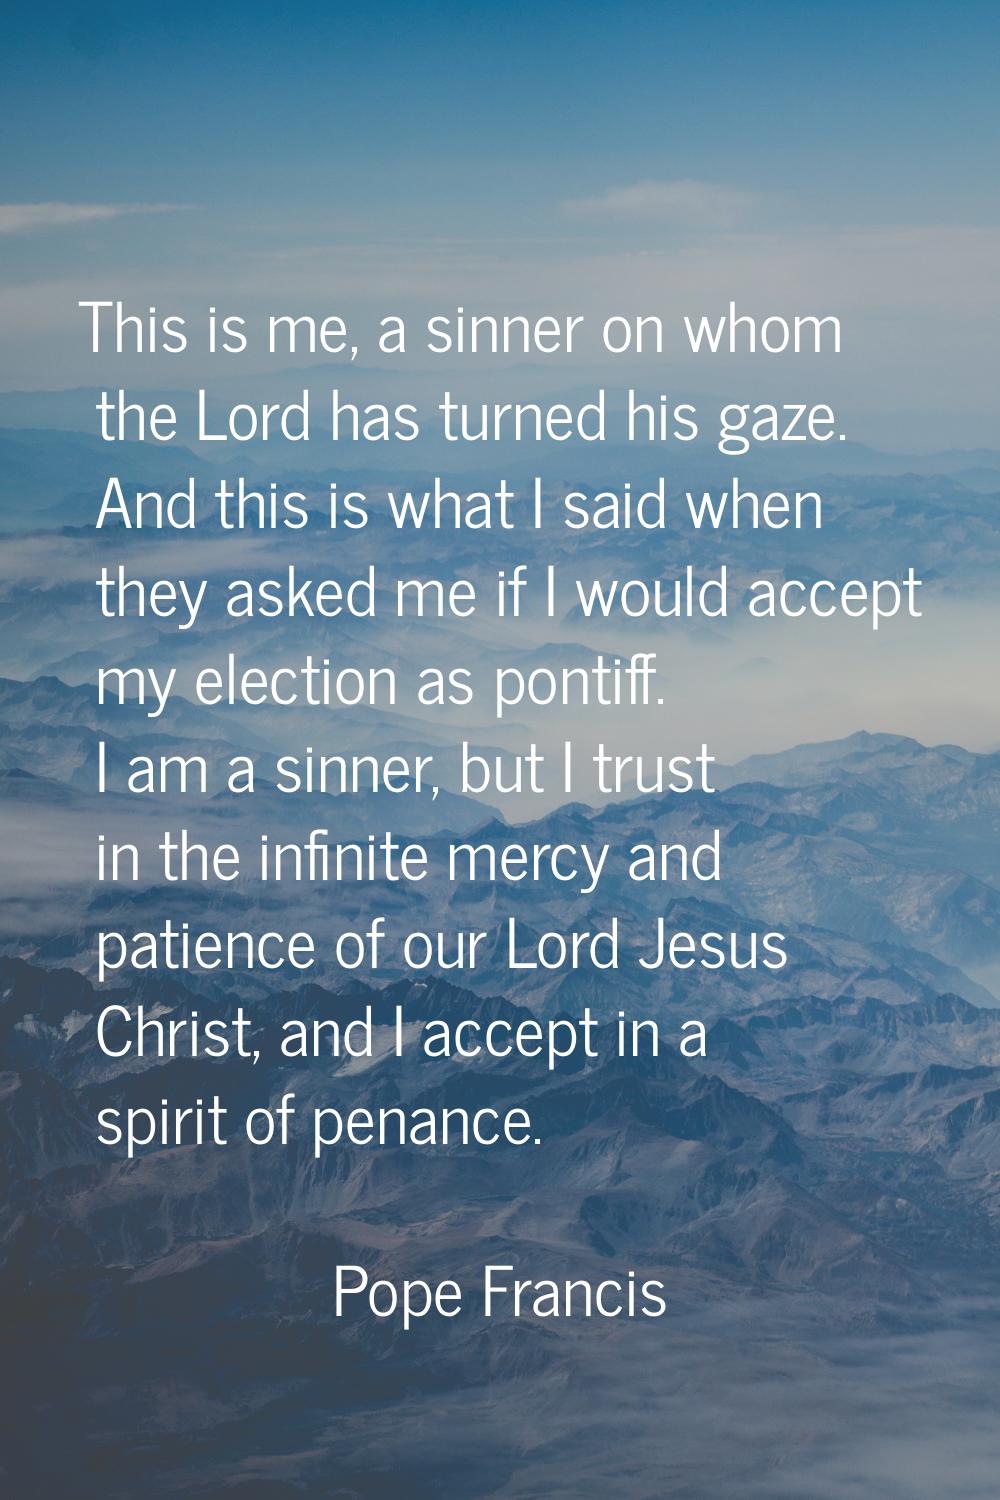 This is me, a sinner on whom the Lord has turned his gaze. And this is what I said when they asked 